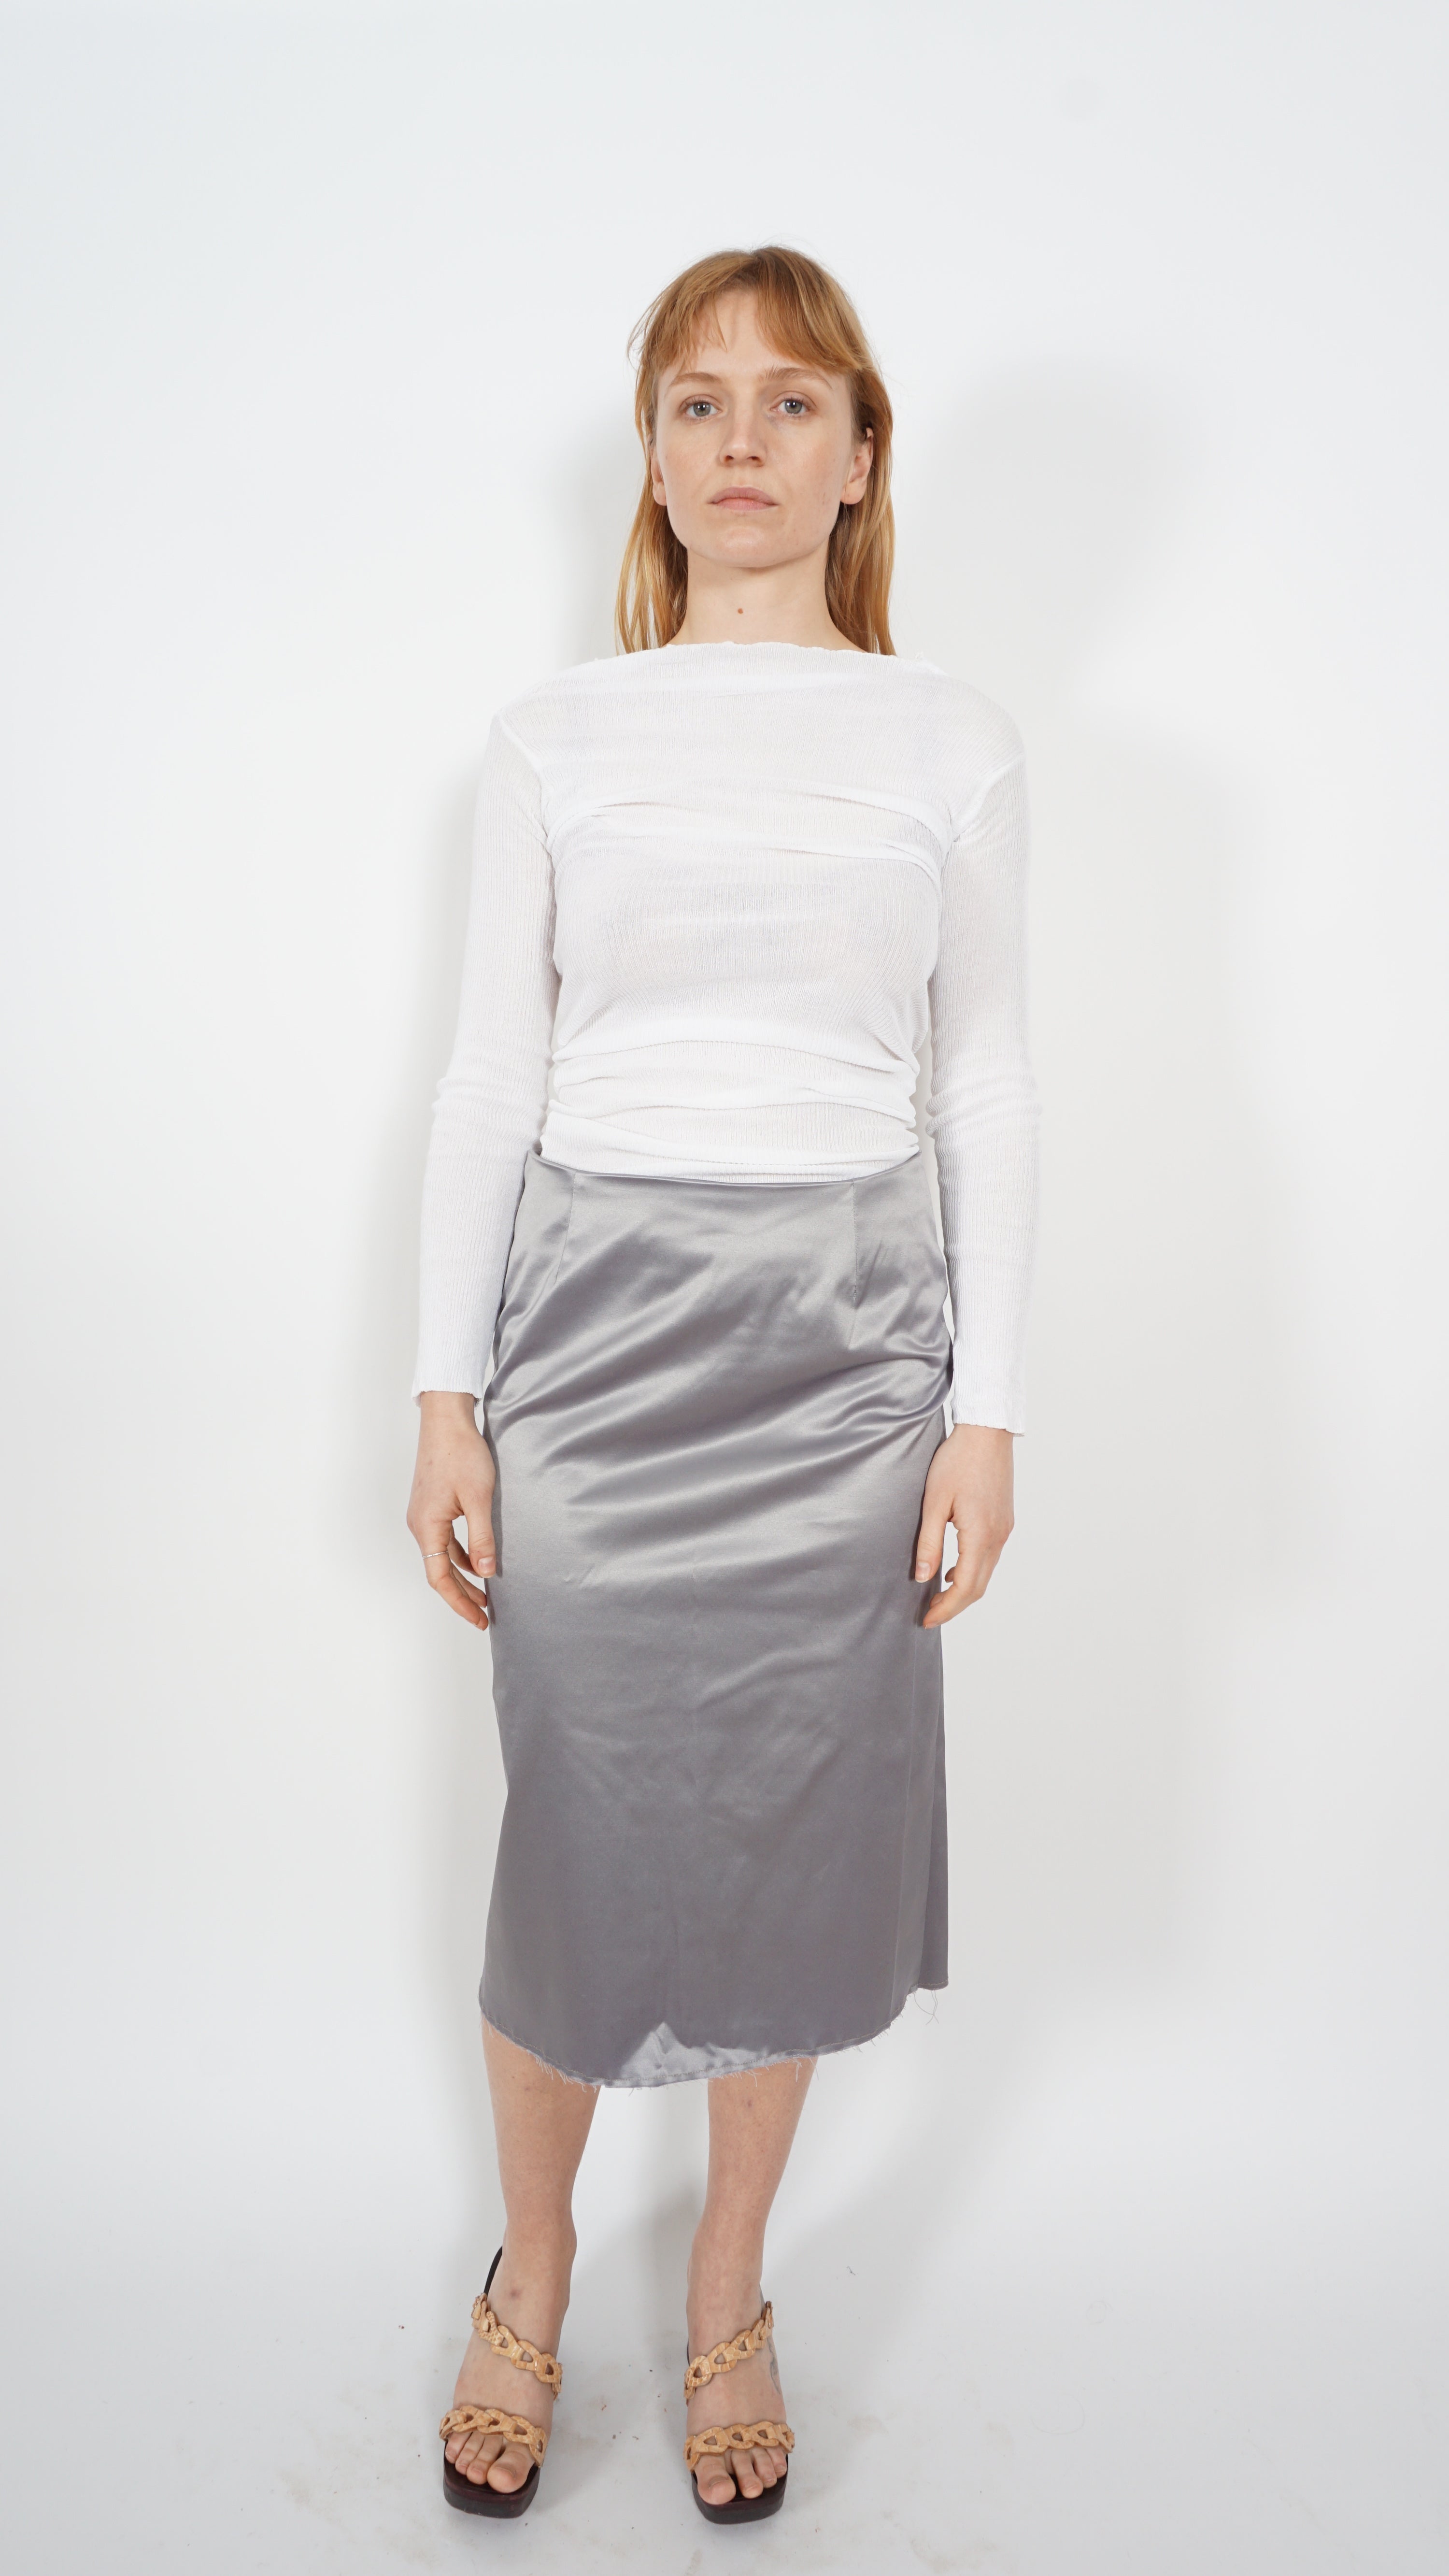 Skirt by Sabine Poupinel